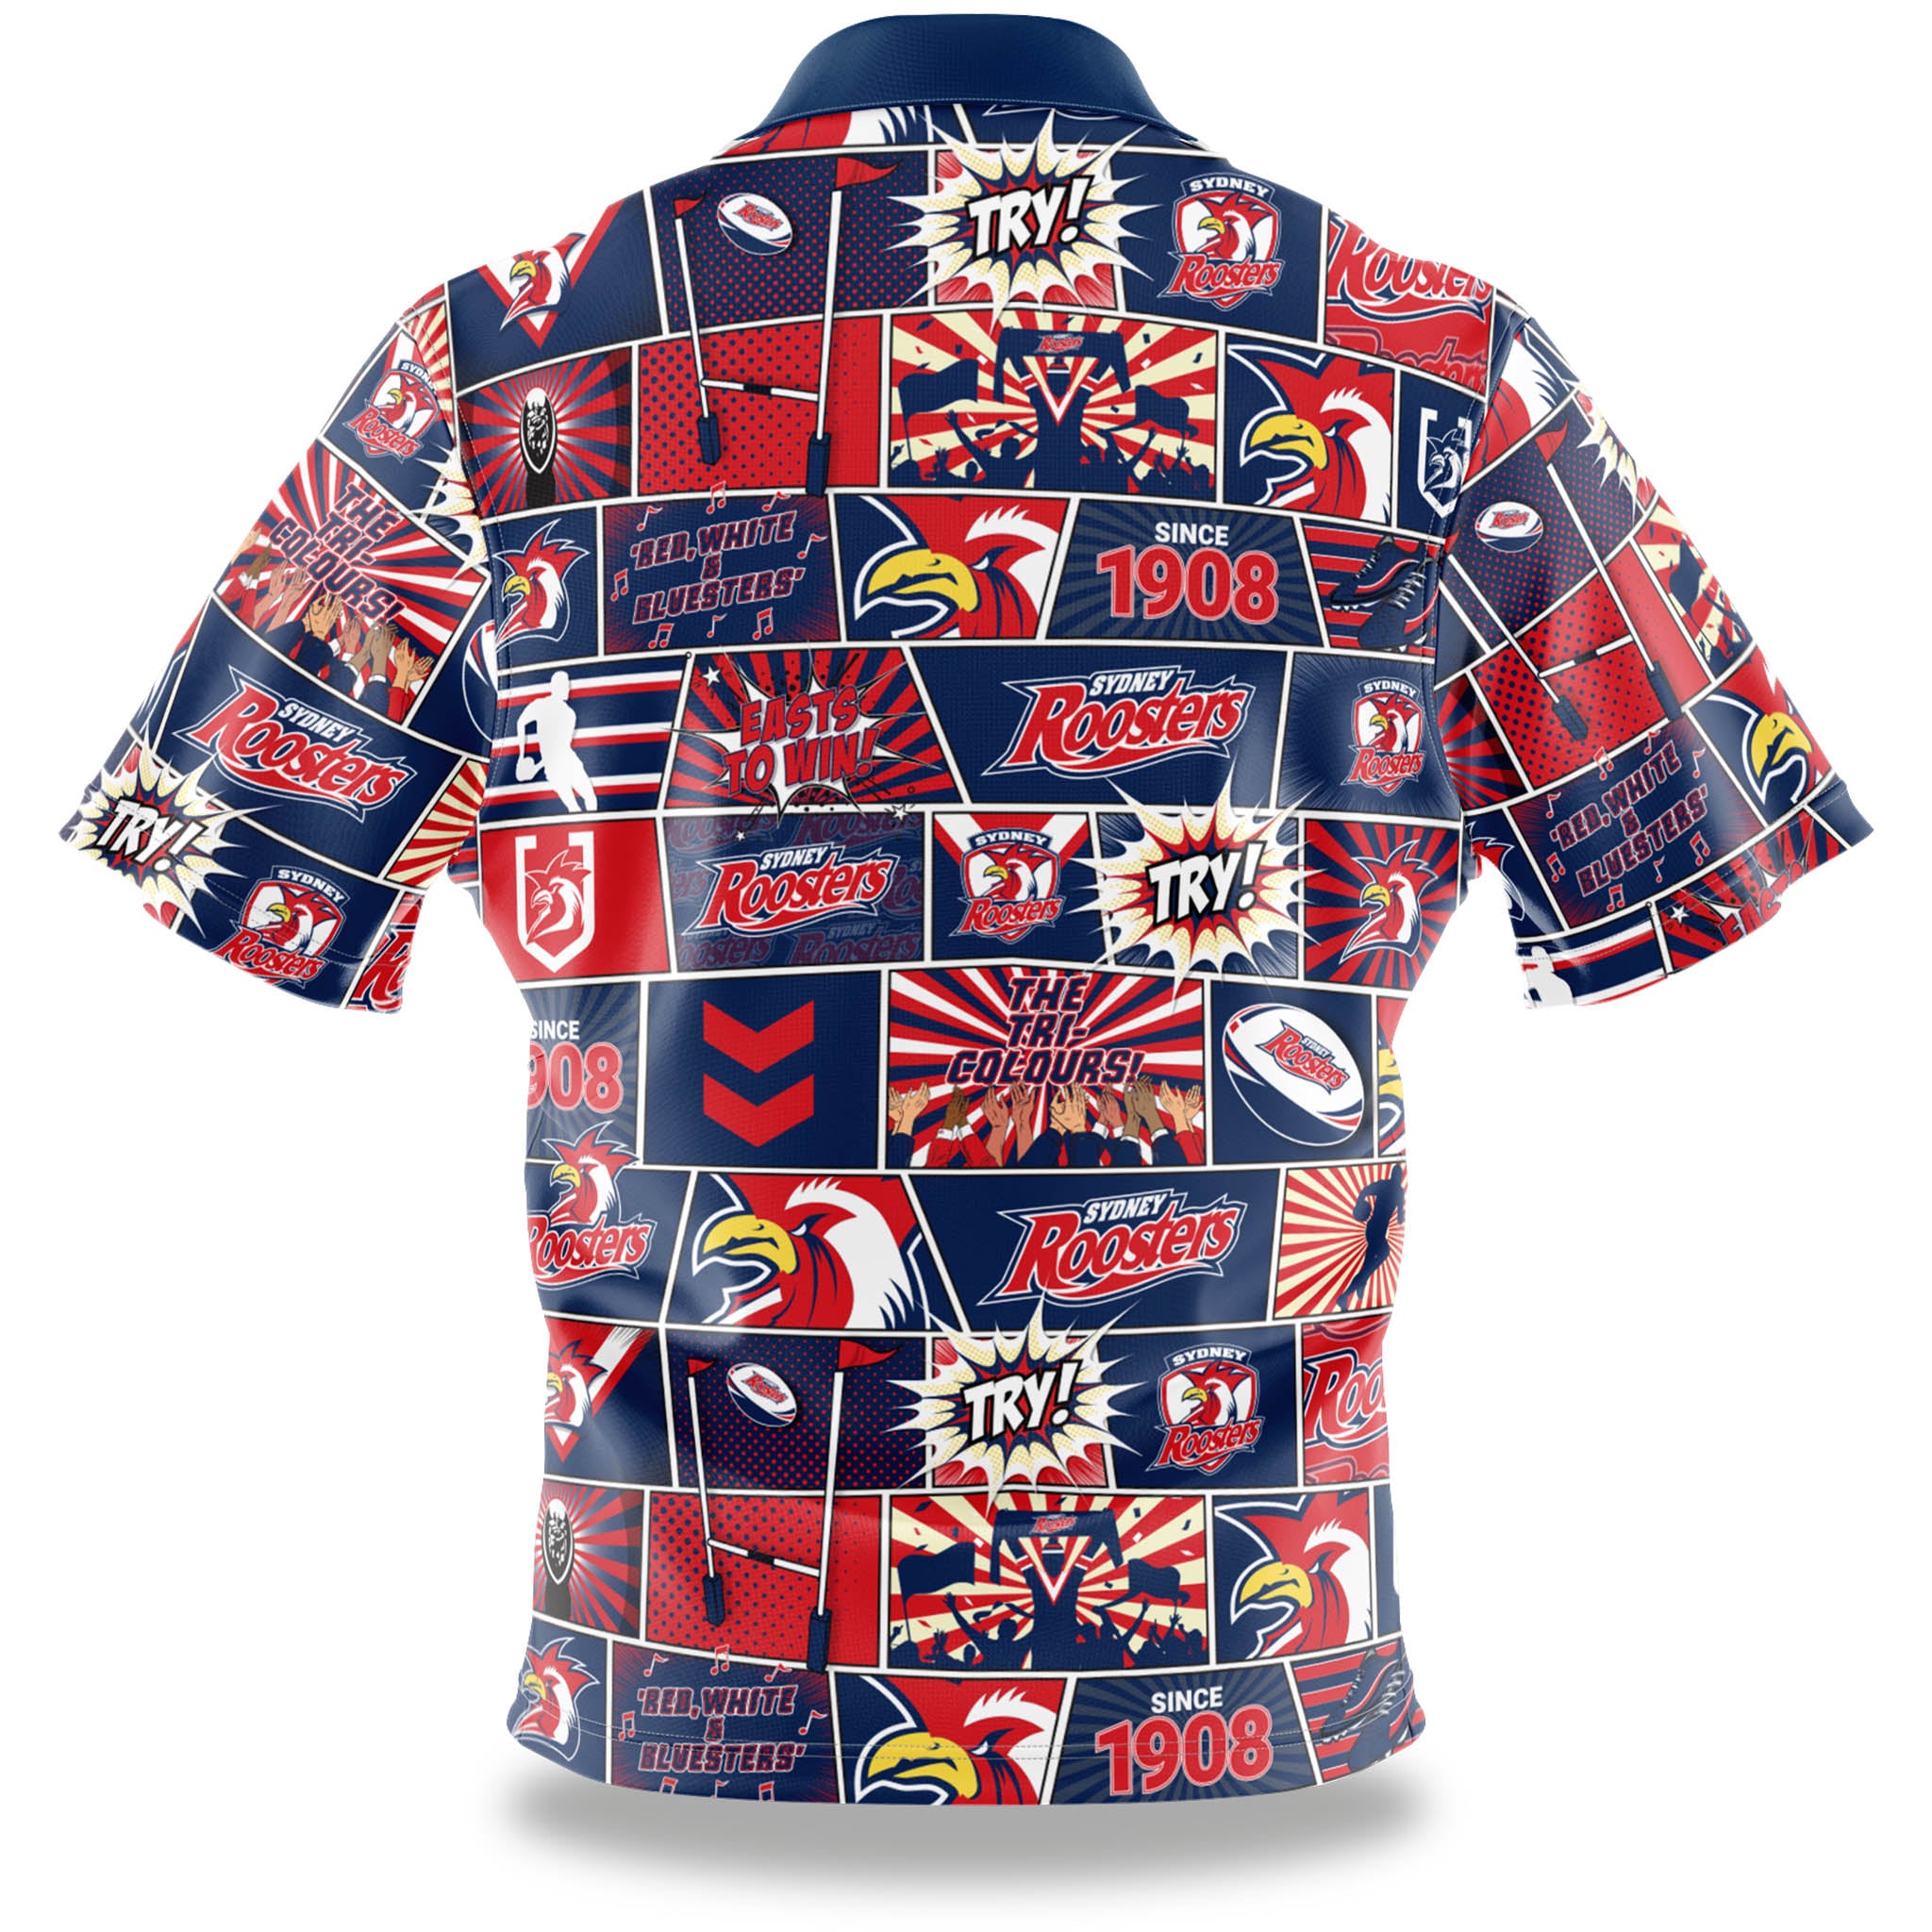 Roosters Fanatics Shirt - The Rugby Shop Darwin